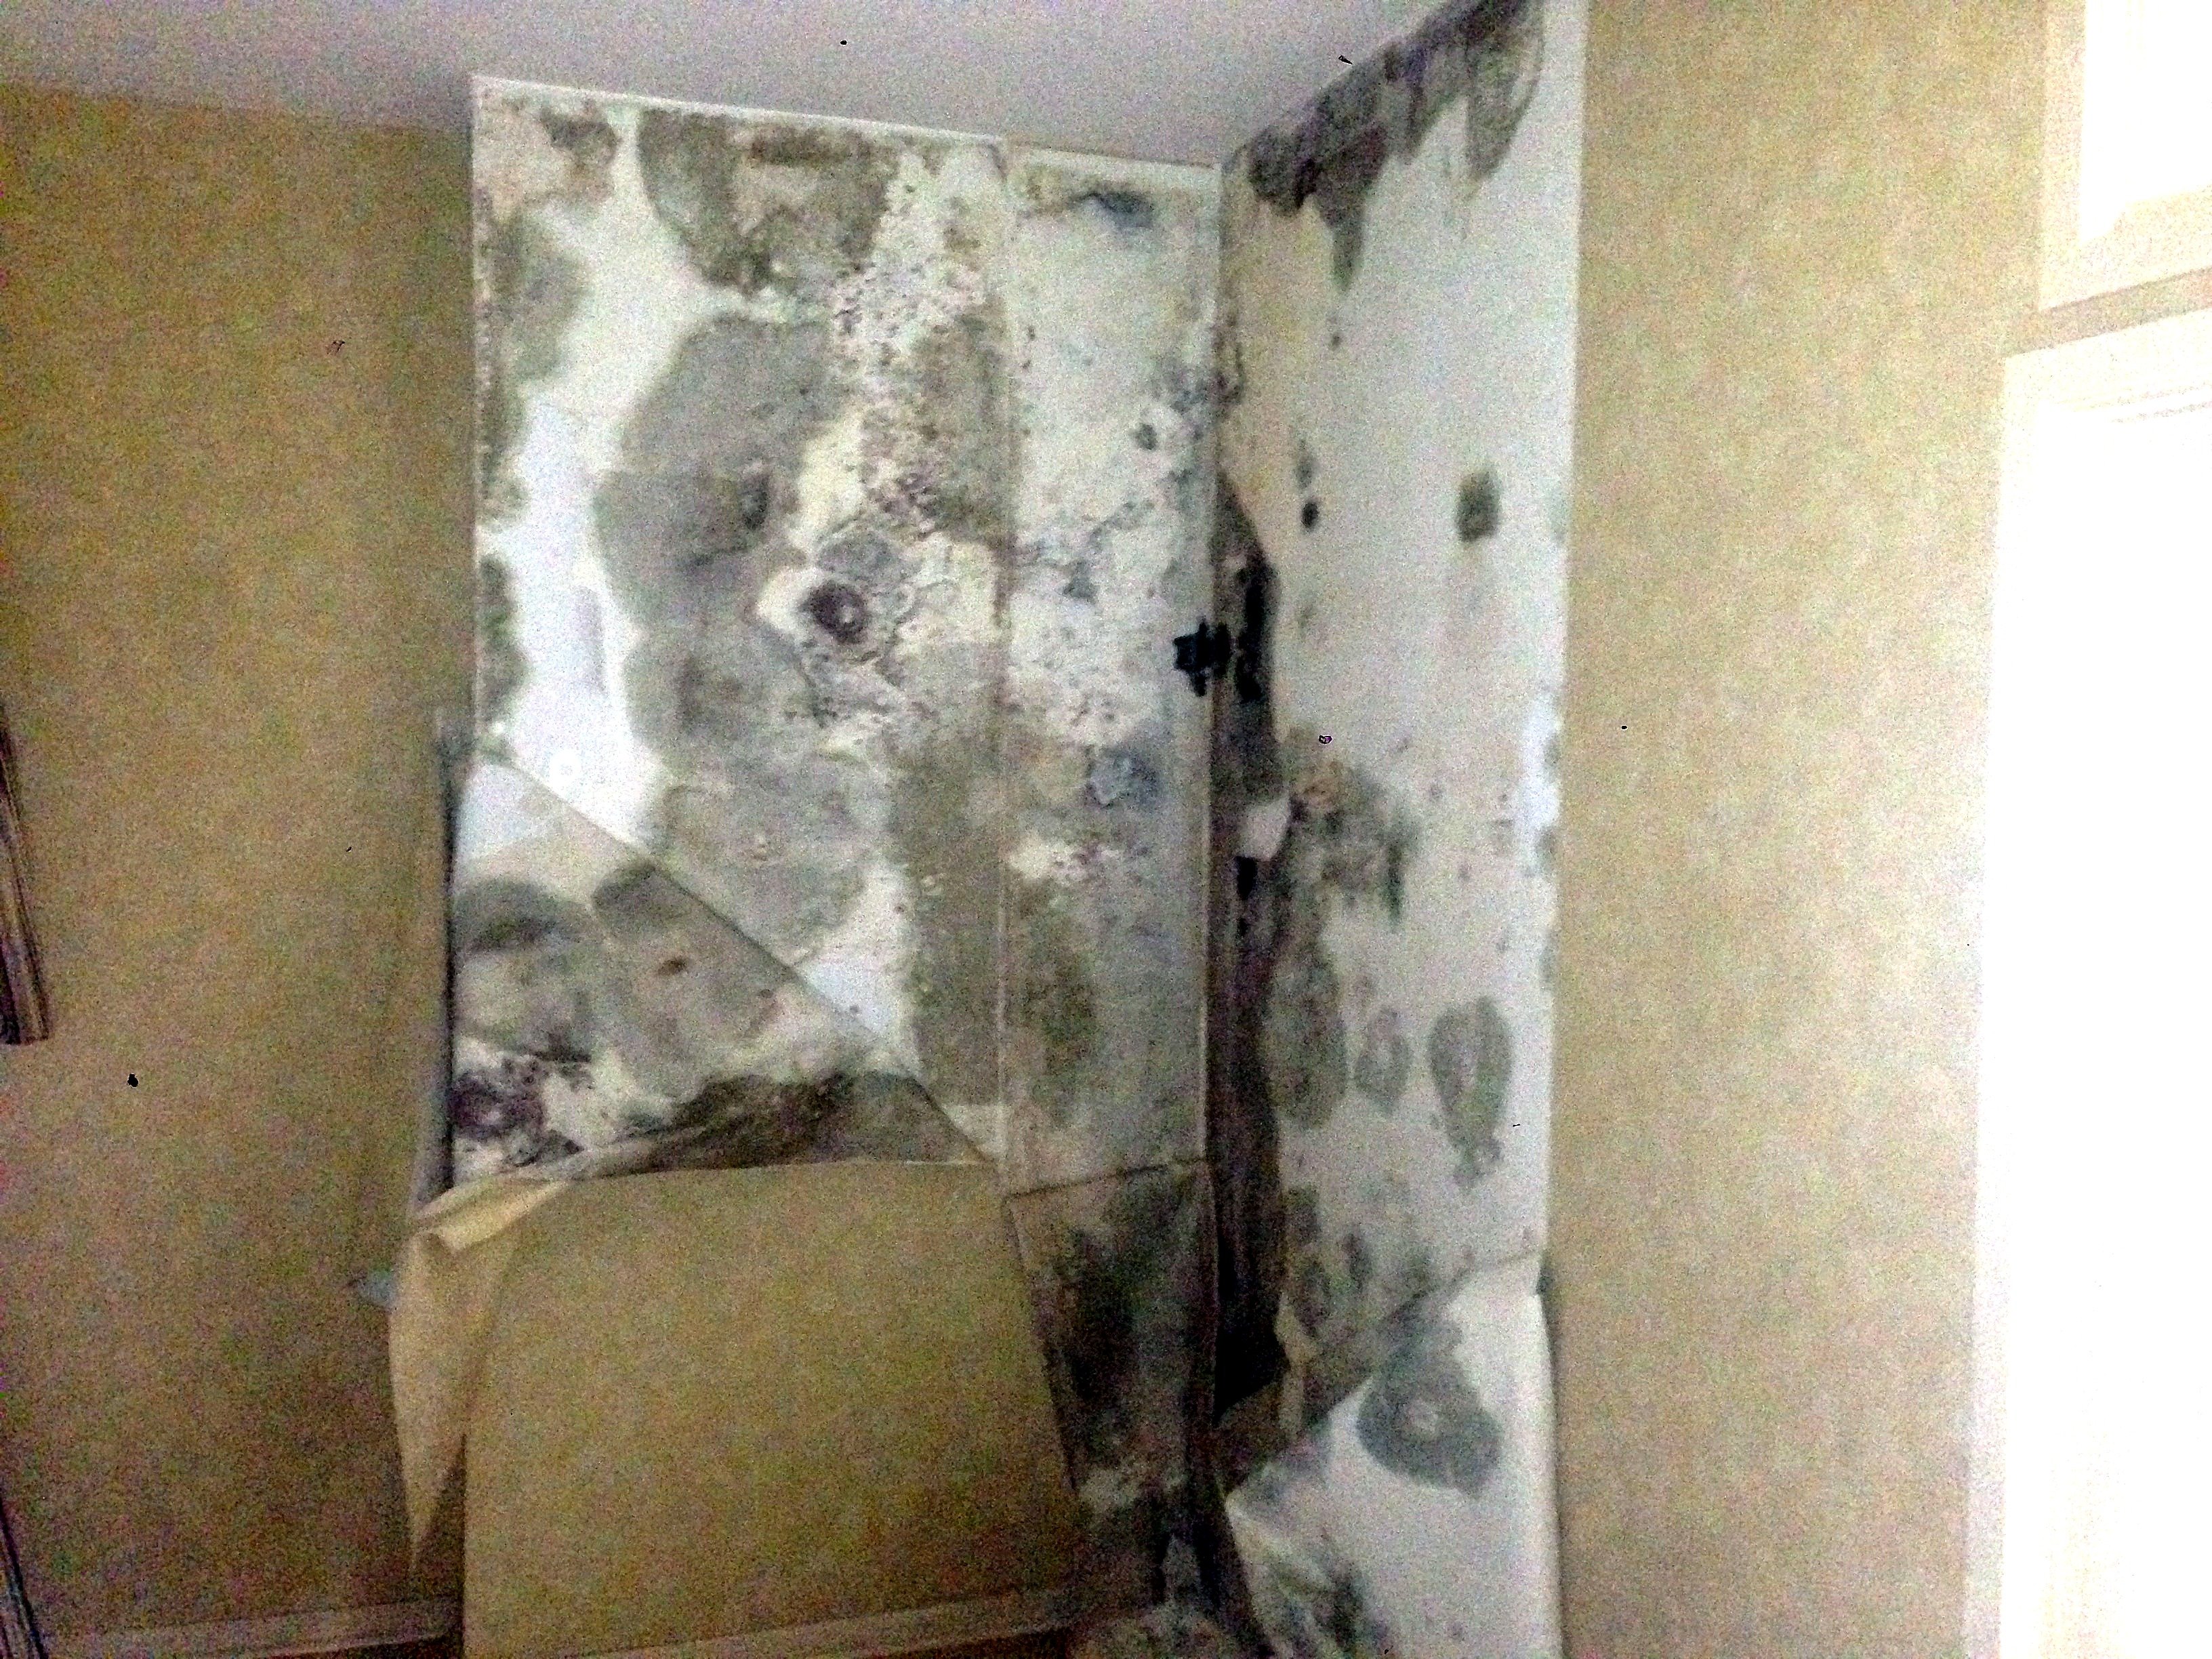 Mold grows on wallpaper and the wallpaper glue.